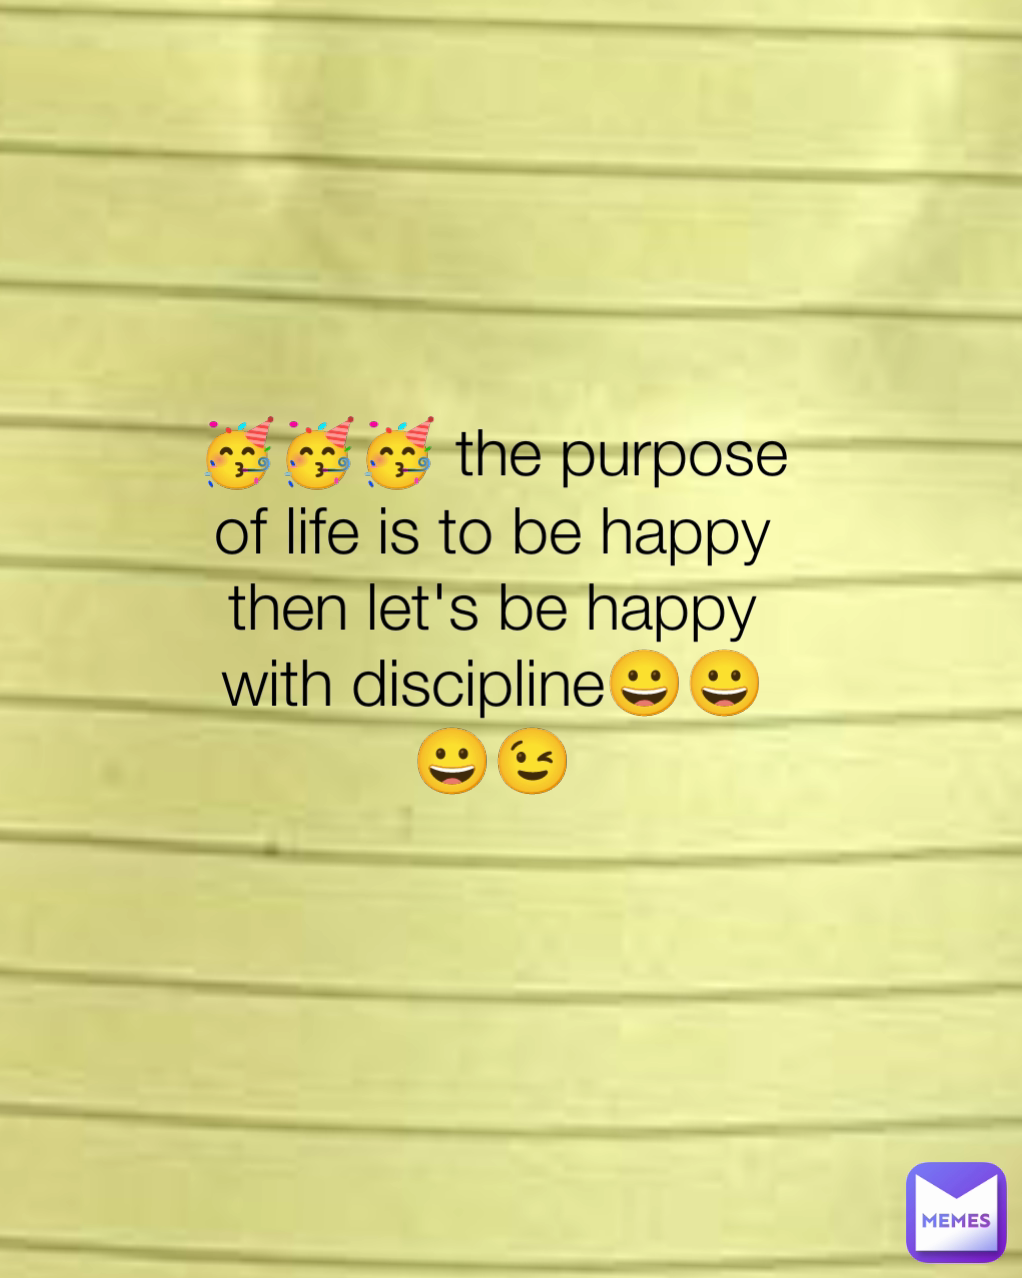 🥳🥳🥳 the purpose of life is to be happy then let's be happy with discipline😀😀😀😉